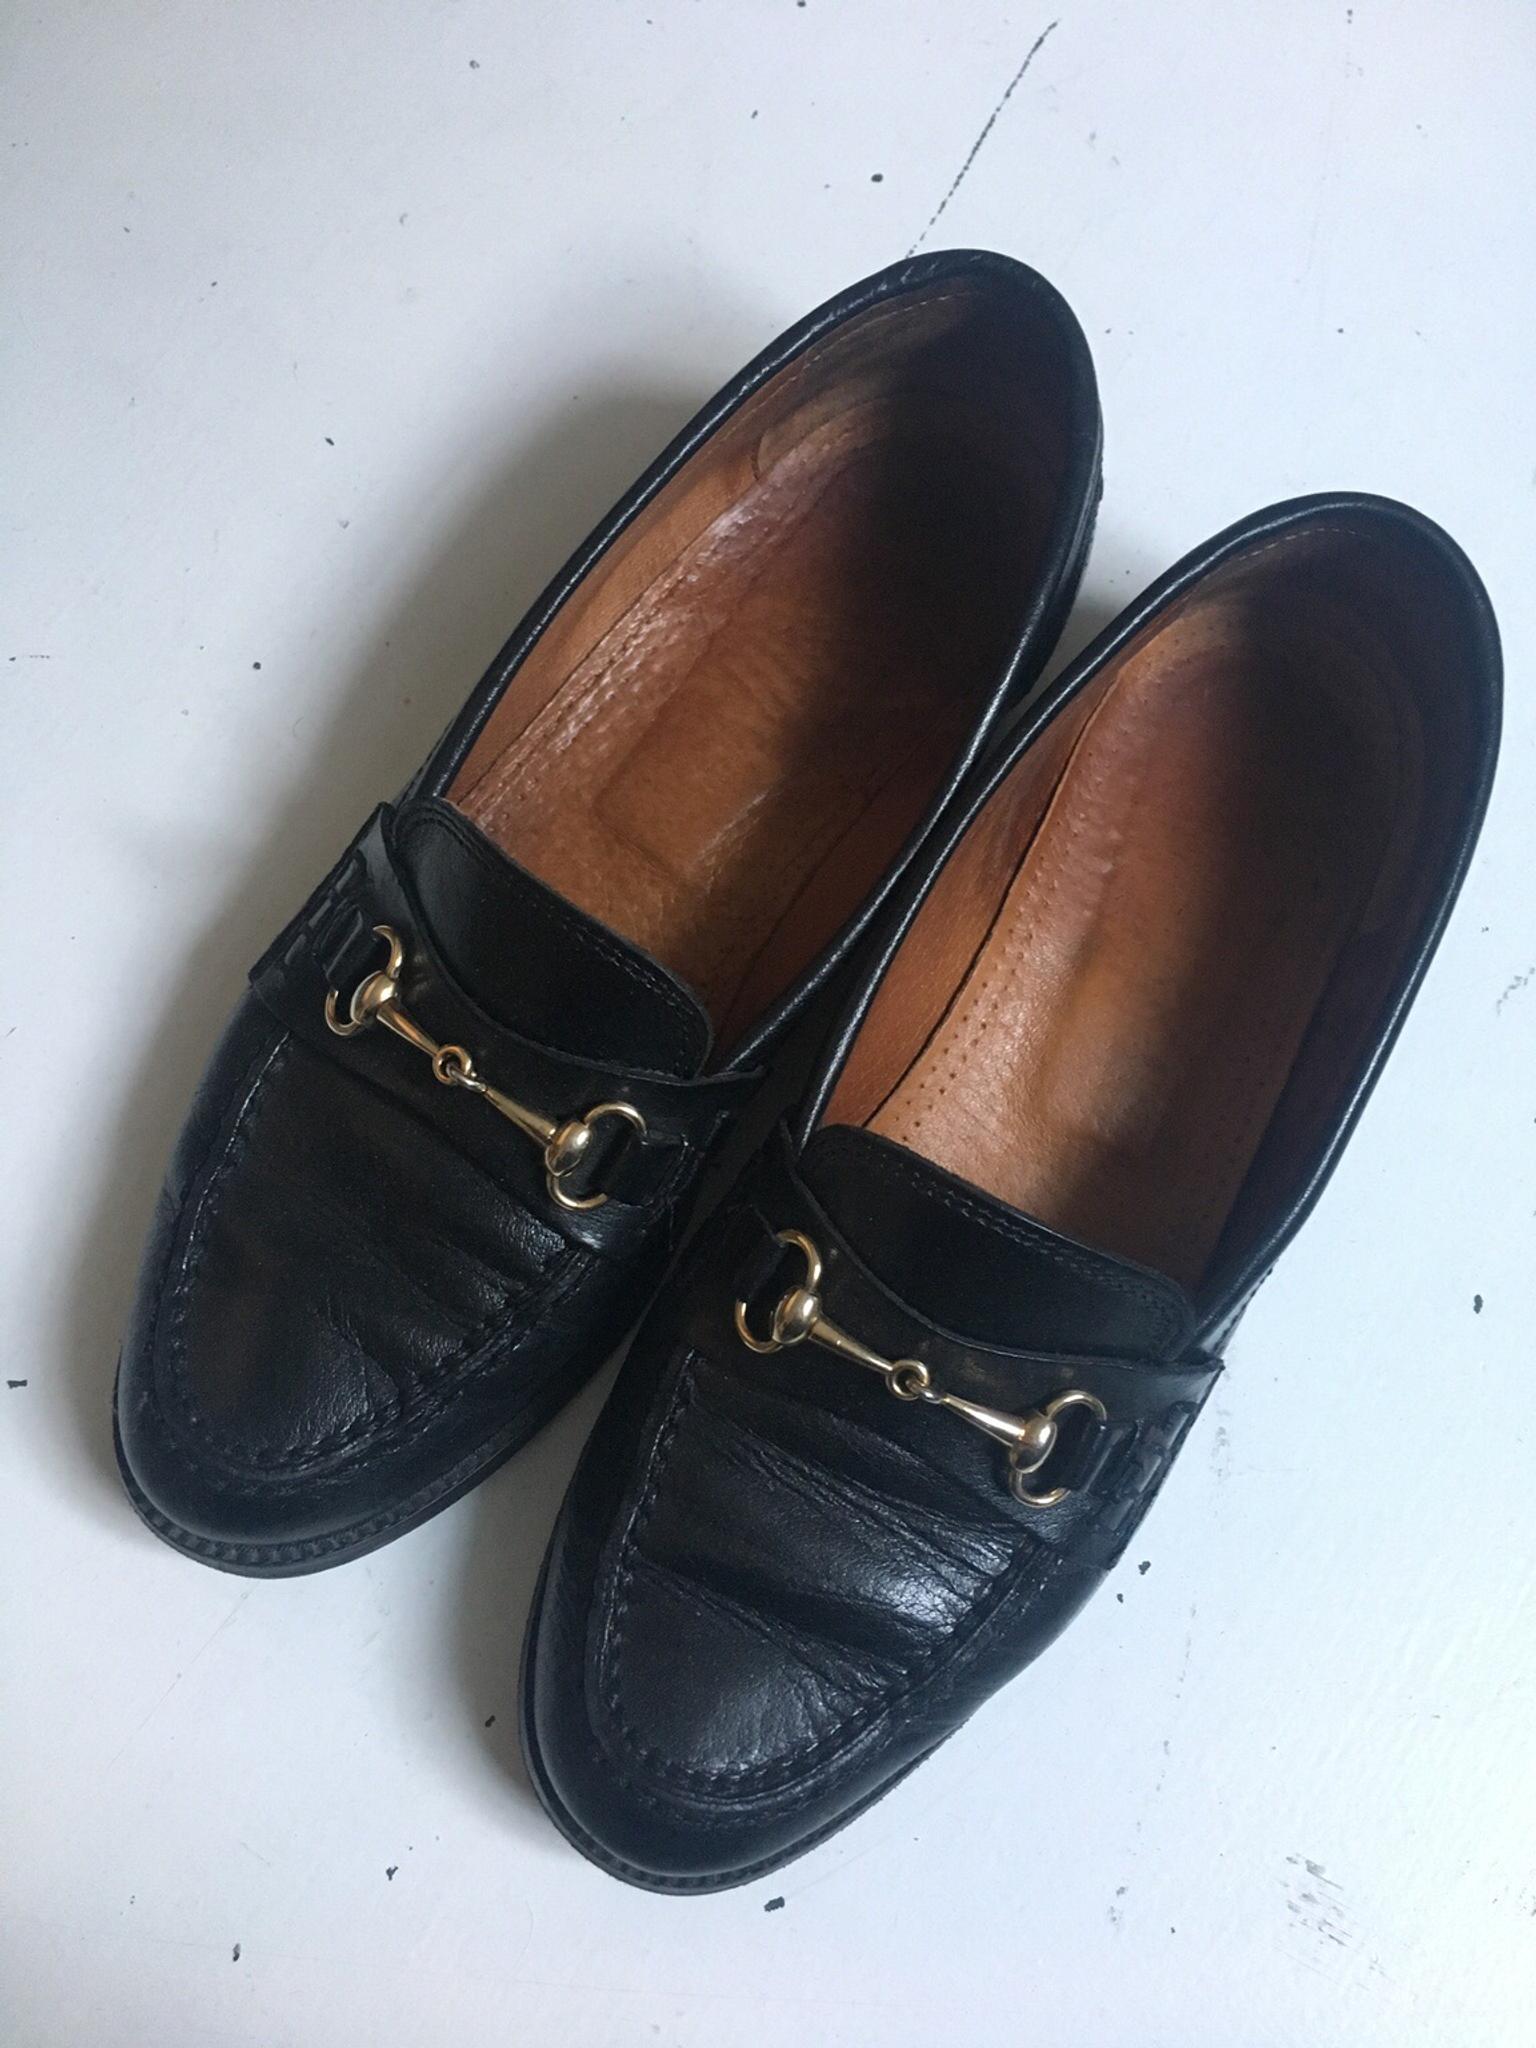 russell bromley loafers